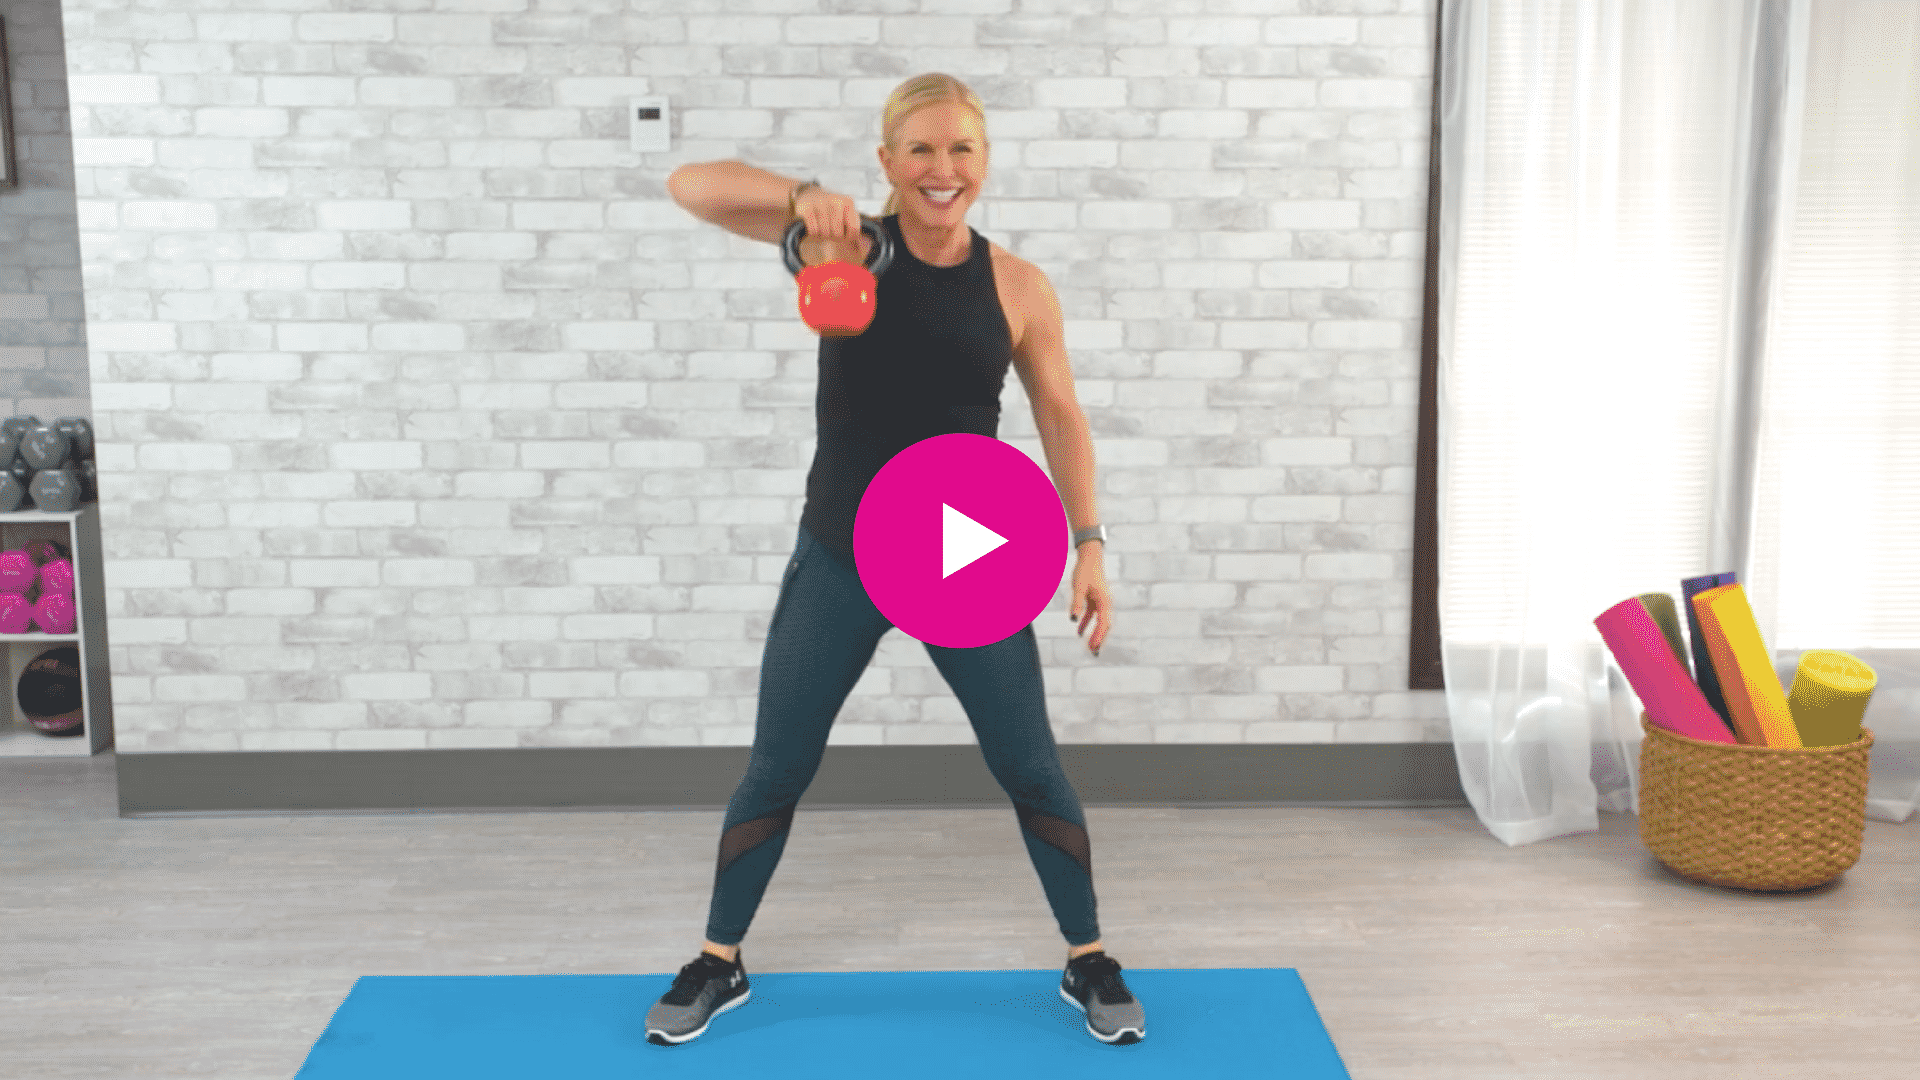 Chris Freytag performing a 10 minute kettlebell workout video